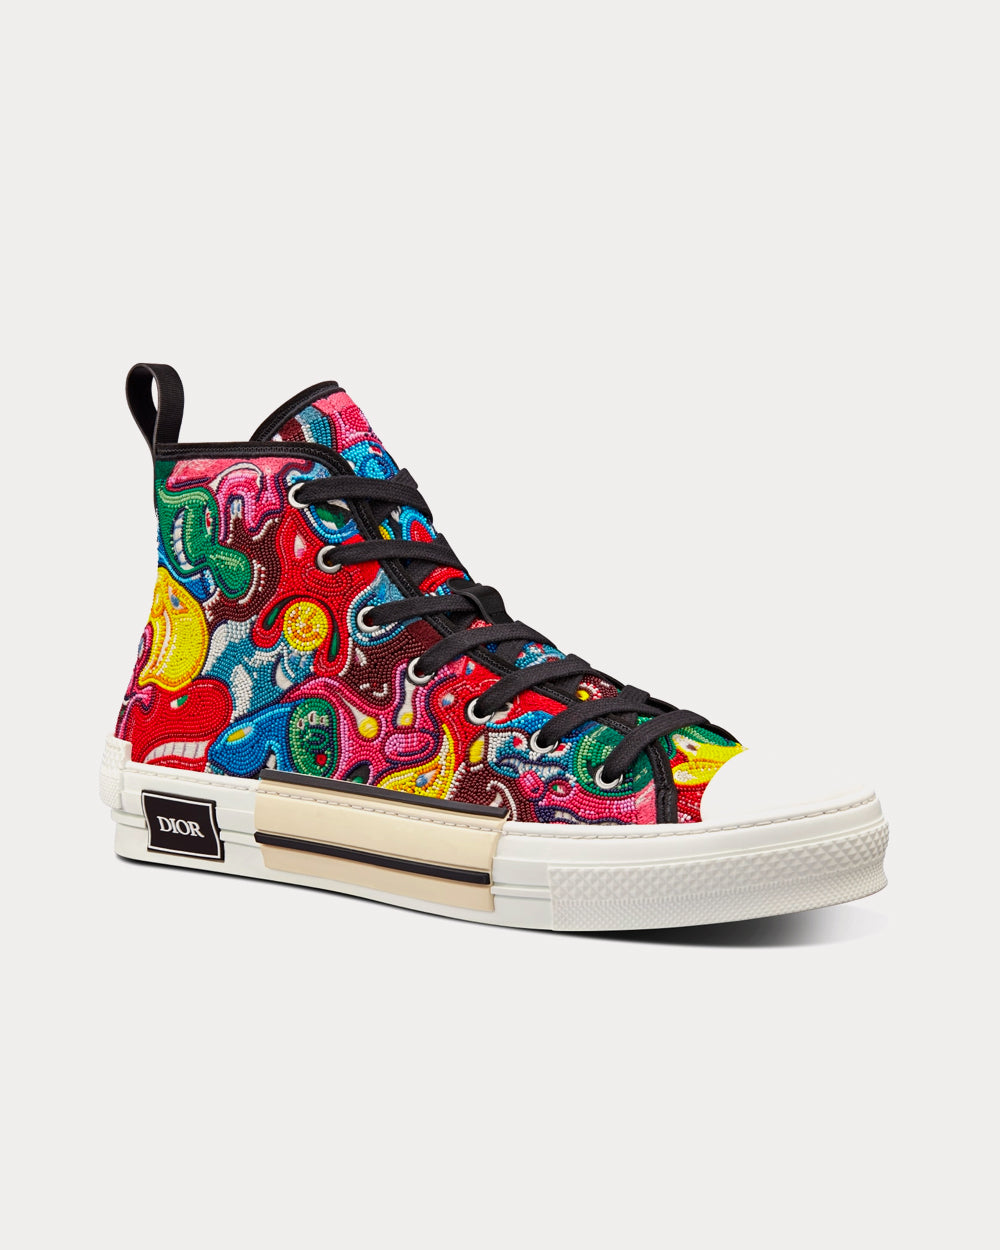 Dior x Kenny Scharf - B23 Multicolor Resin Pearl Embroidery High Top Sneakers